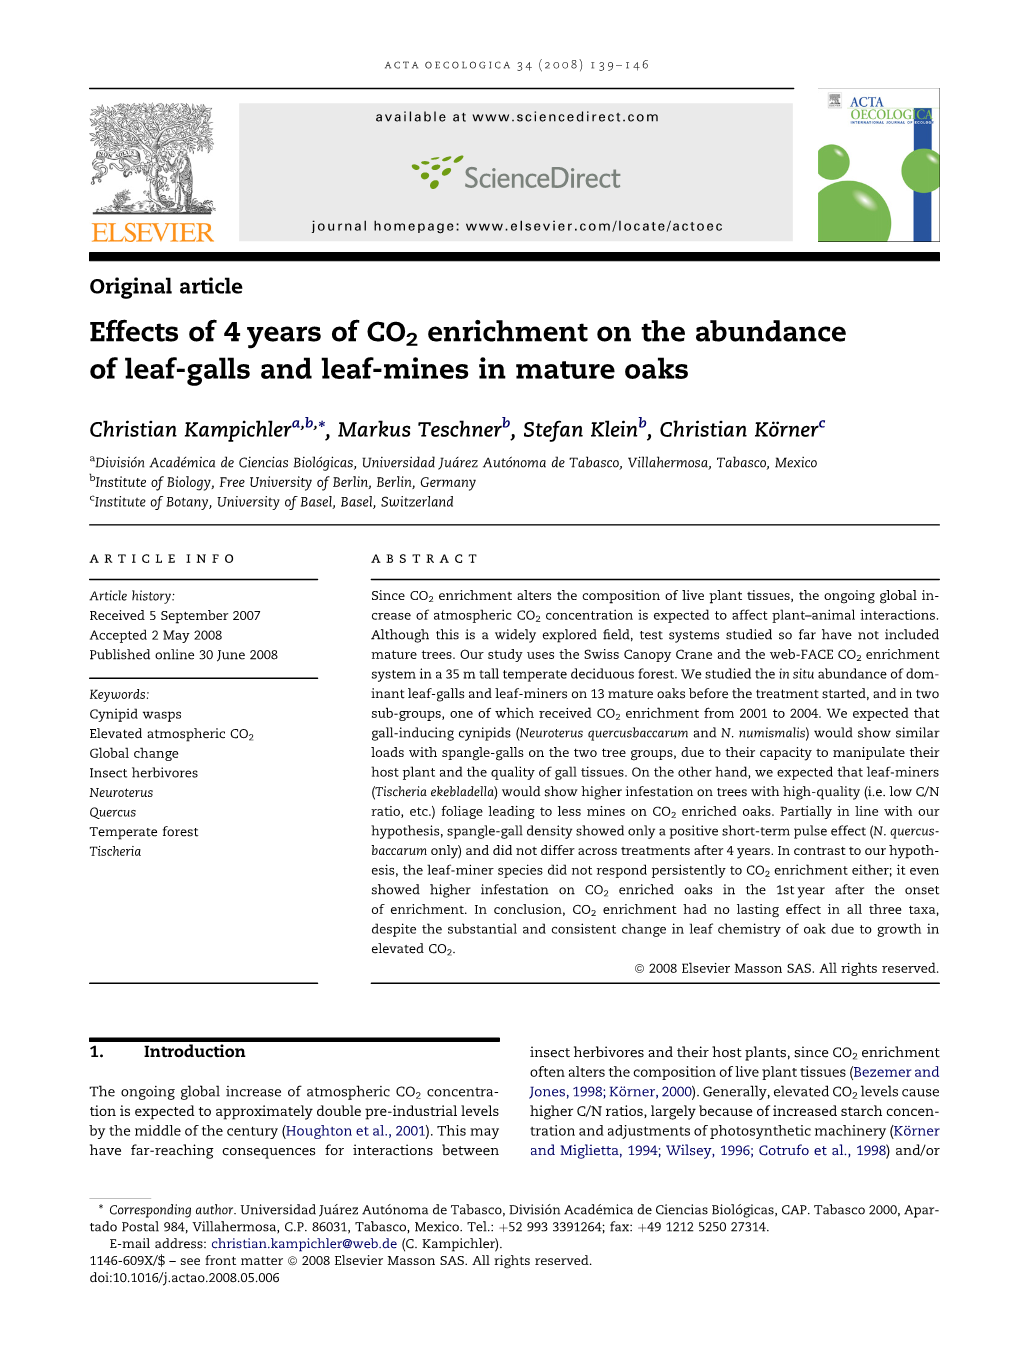 Effects of 4 Years of CO2 Enrichment on the Abundance of Leaf-Galls and Leaf-Mines in Mature Oaks